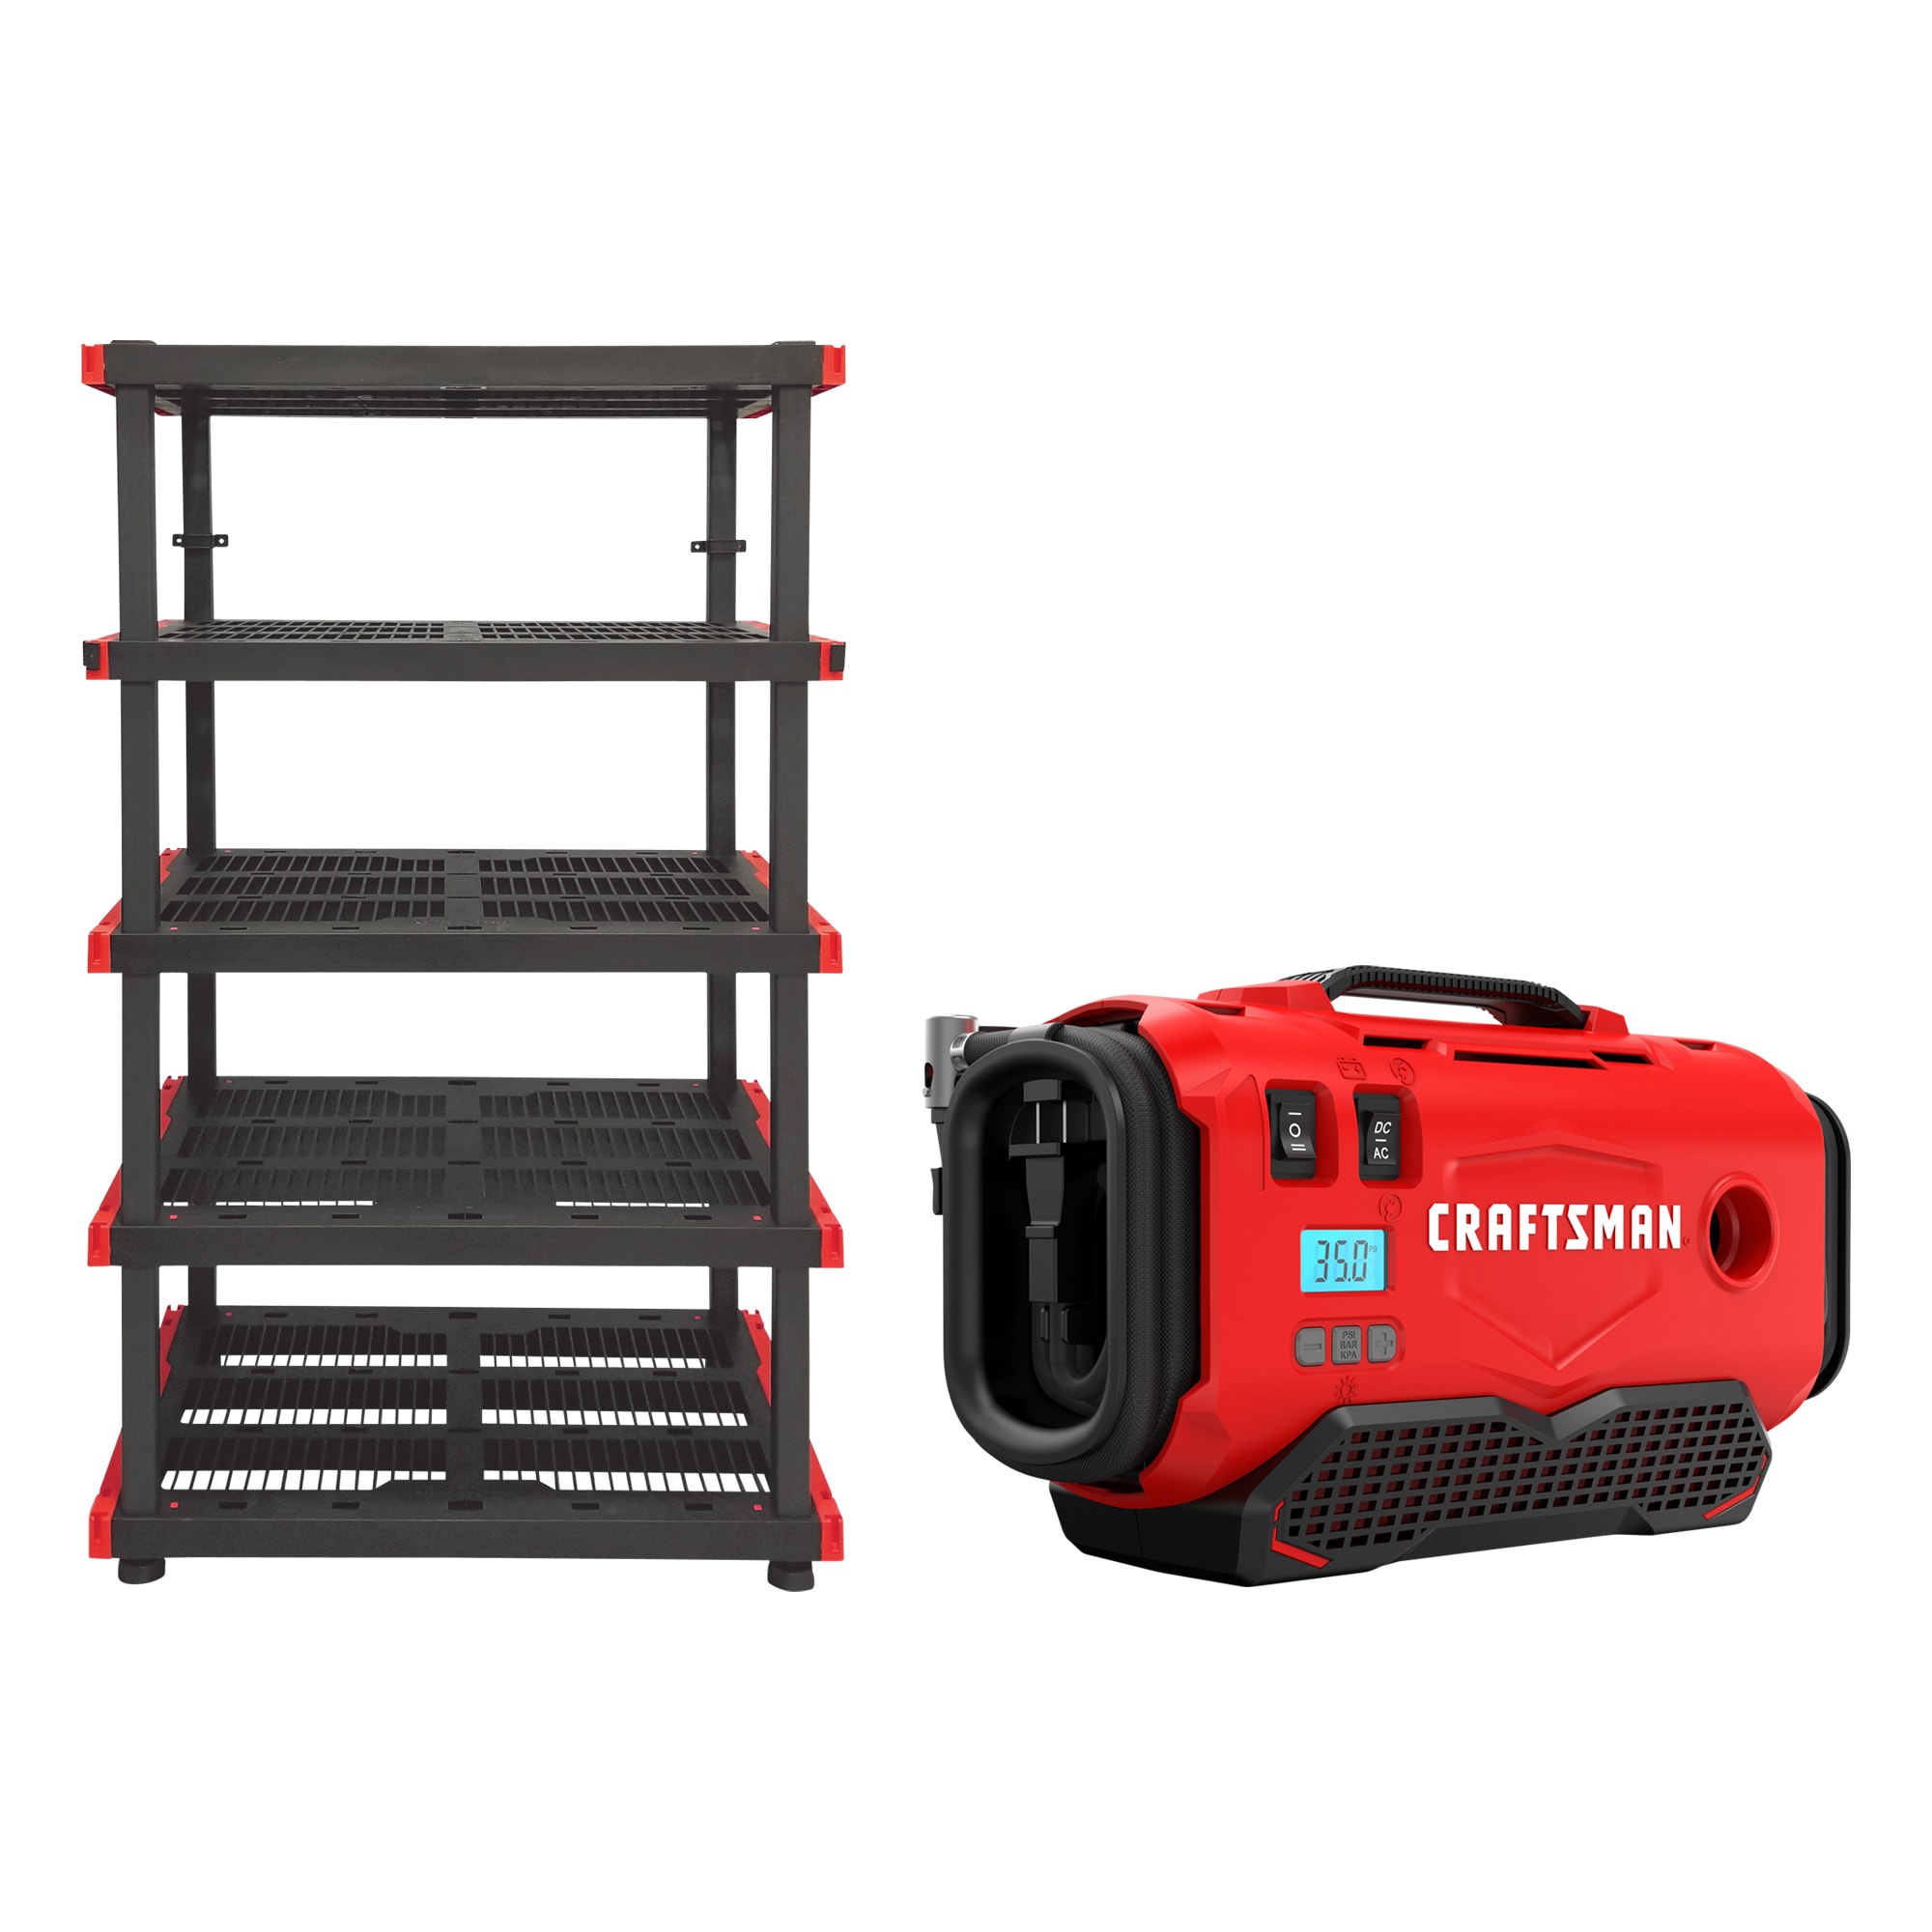 CRAFTSMAN Plastic Heavy Duty 5-Tier Utility Shelving Unit (40-in W x 24-in D x 72-in H) & 20-volt Max / 120 Lithium Ion (li-ion) Air Inflator